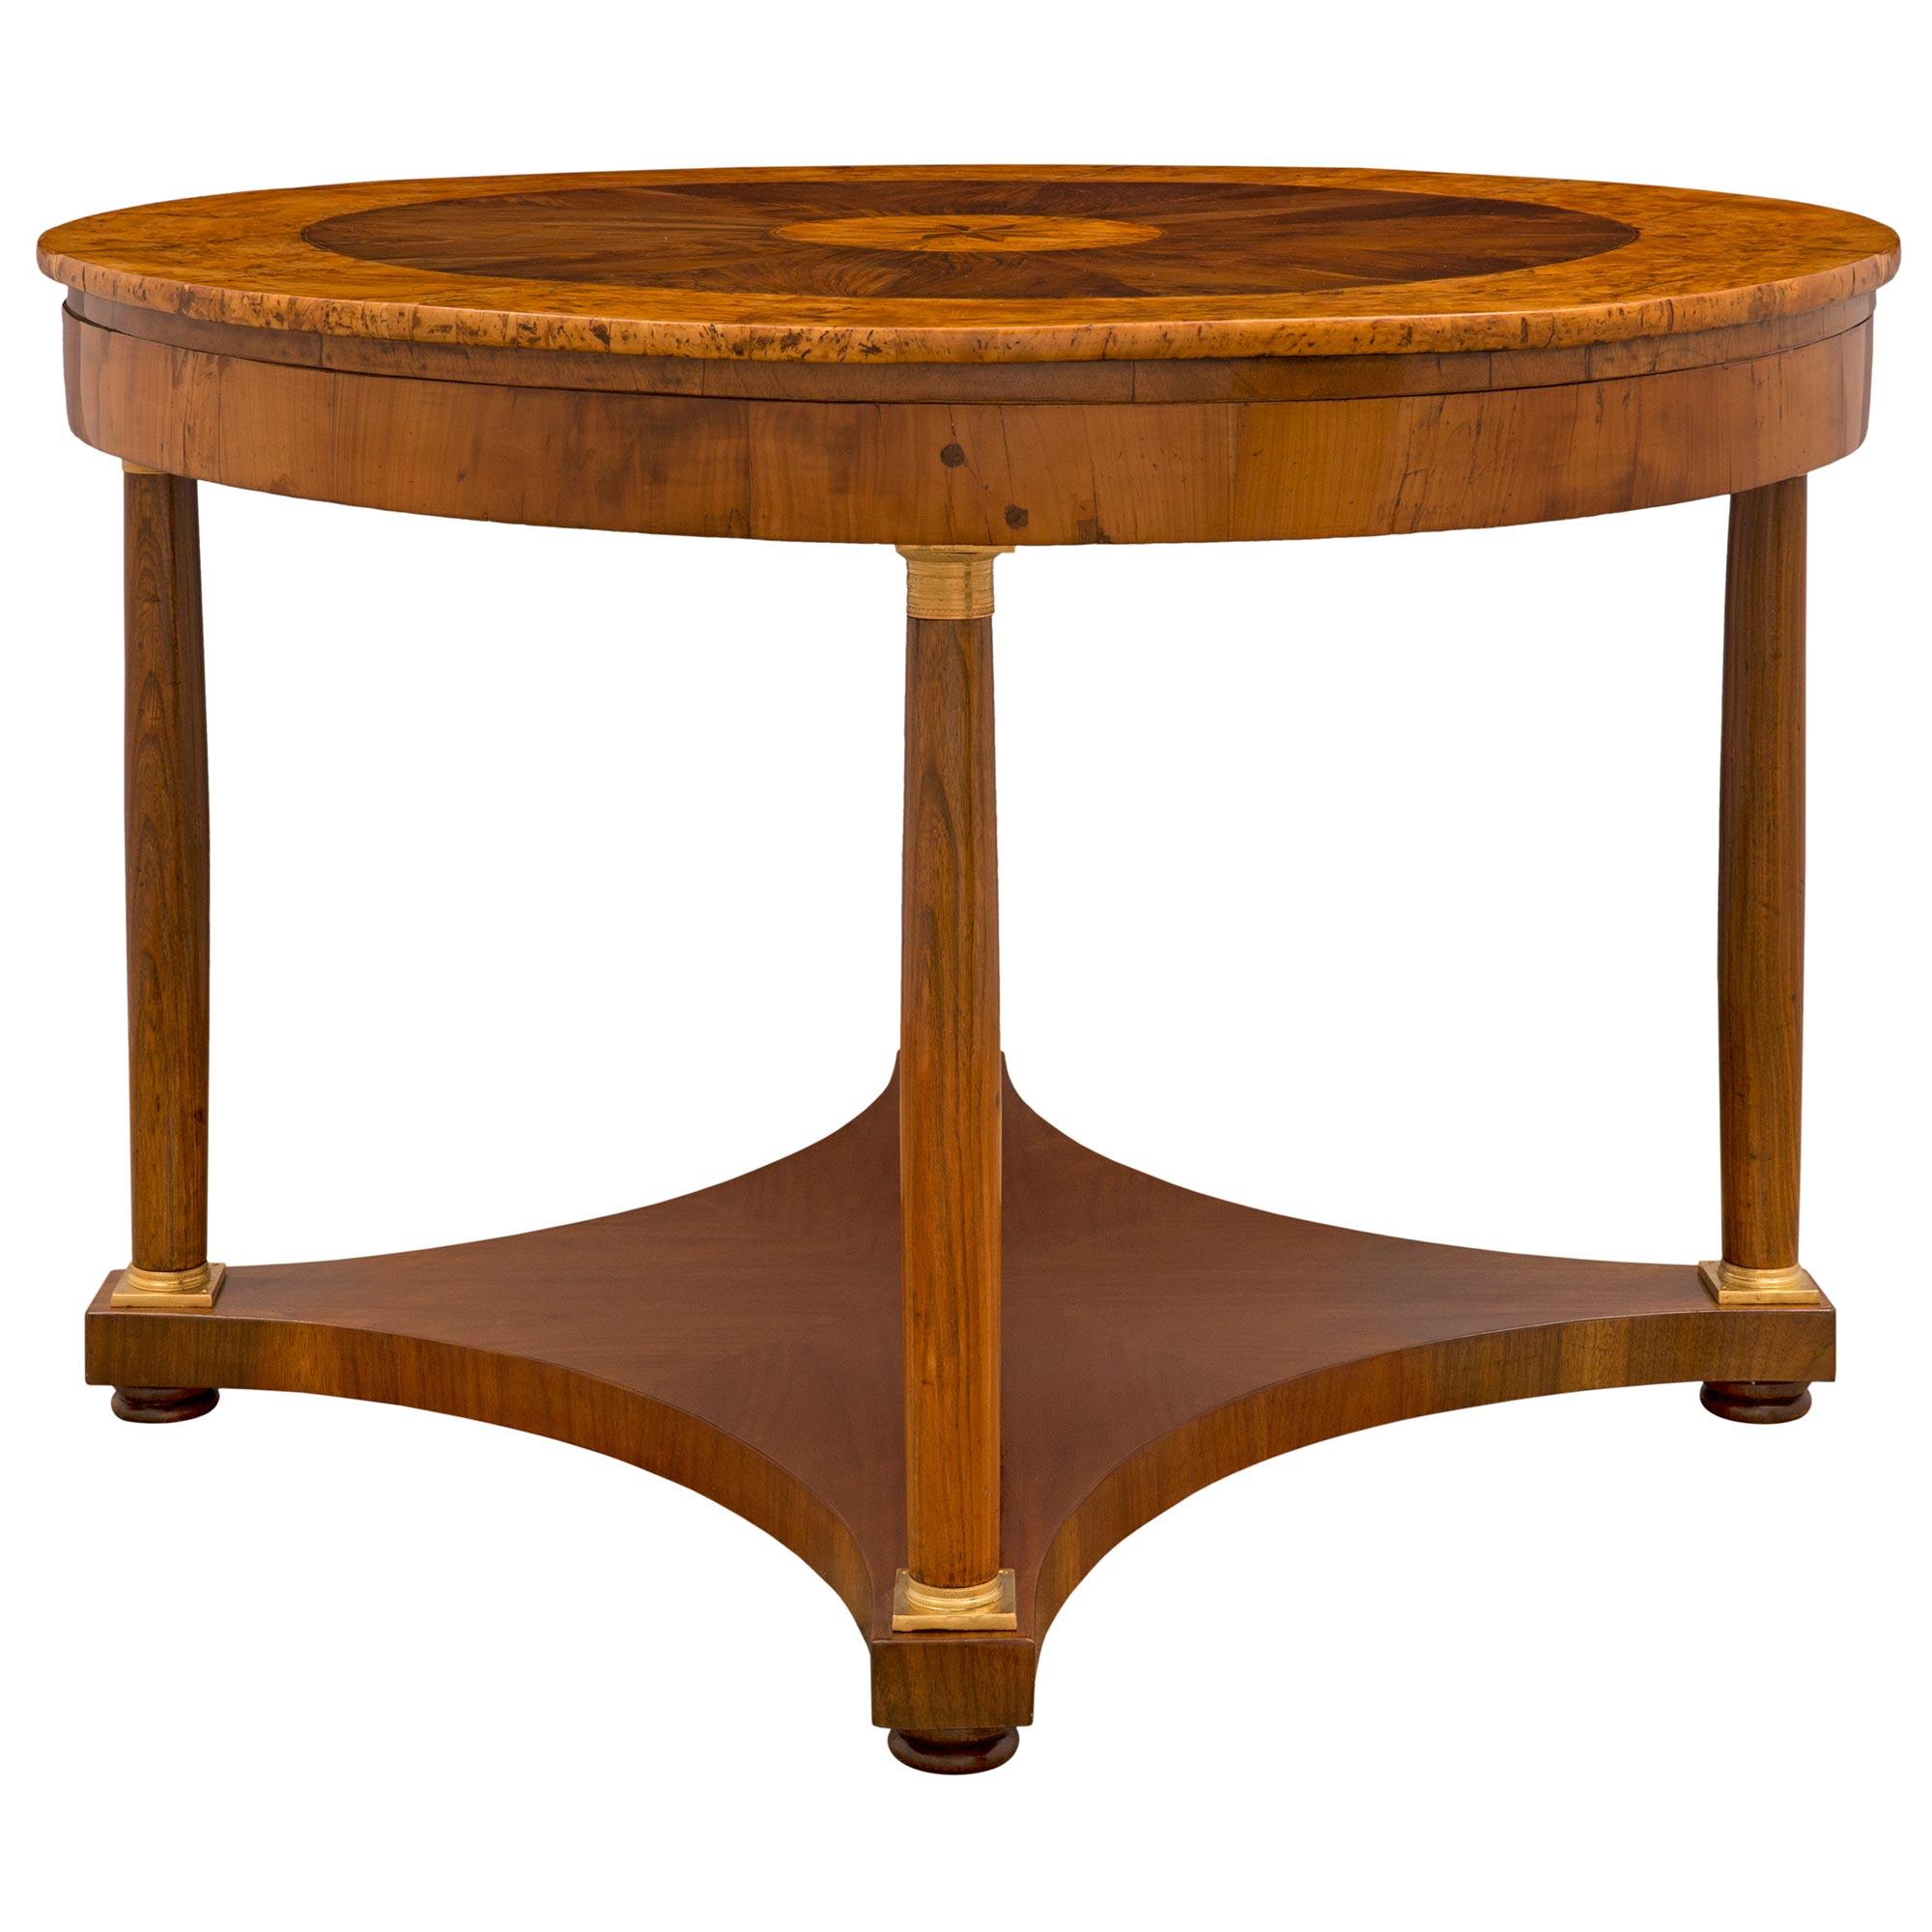 A striking and most decorative Italian 18th century Neo-Classical st. walnut, burl walnut, mahogany and ormolu center table. The circular table is raised by four beautiful circular column supports with fine ormolu top and bottom caps and charming